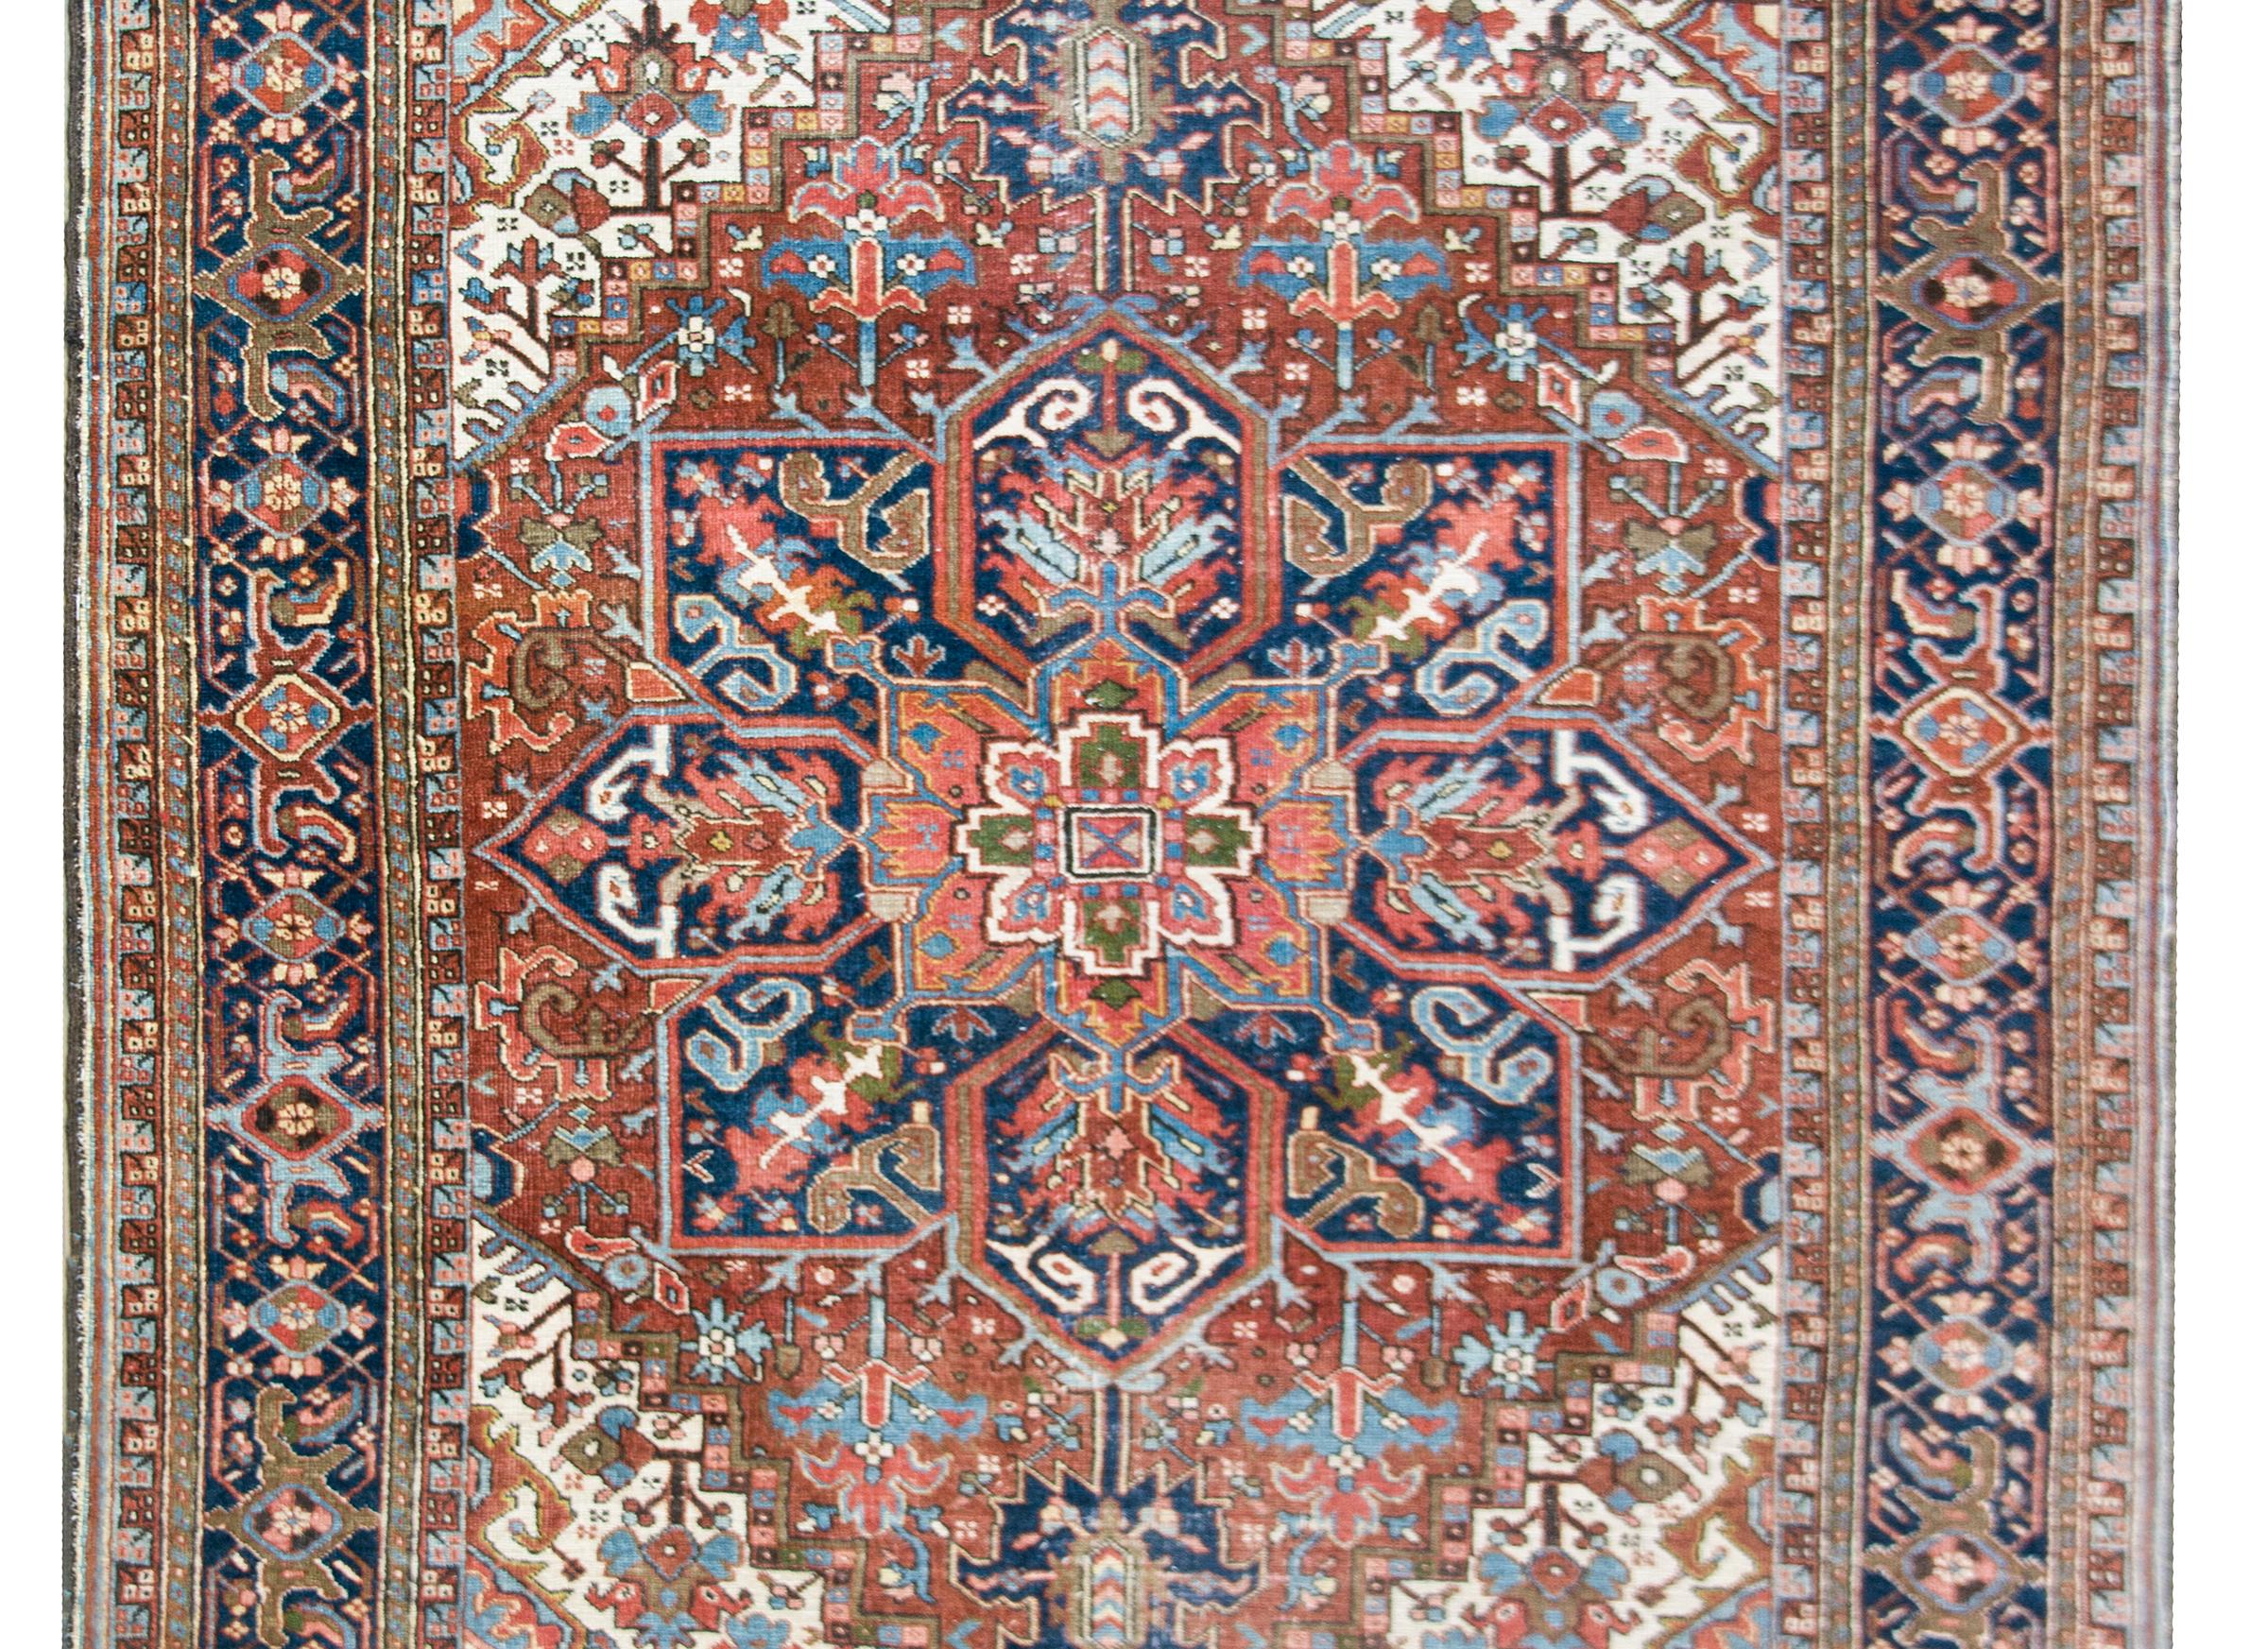 A bold early 20th century Persian Heriz rug with a traditional large central floral patterned medallion woven in myriad colors including crimson, indigo, green, pink, and white, and set against a crimson background. The border is stunning comprised